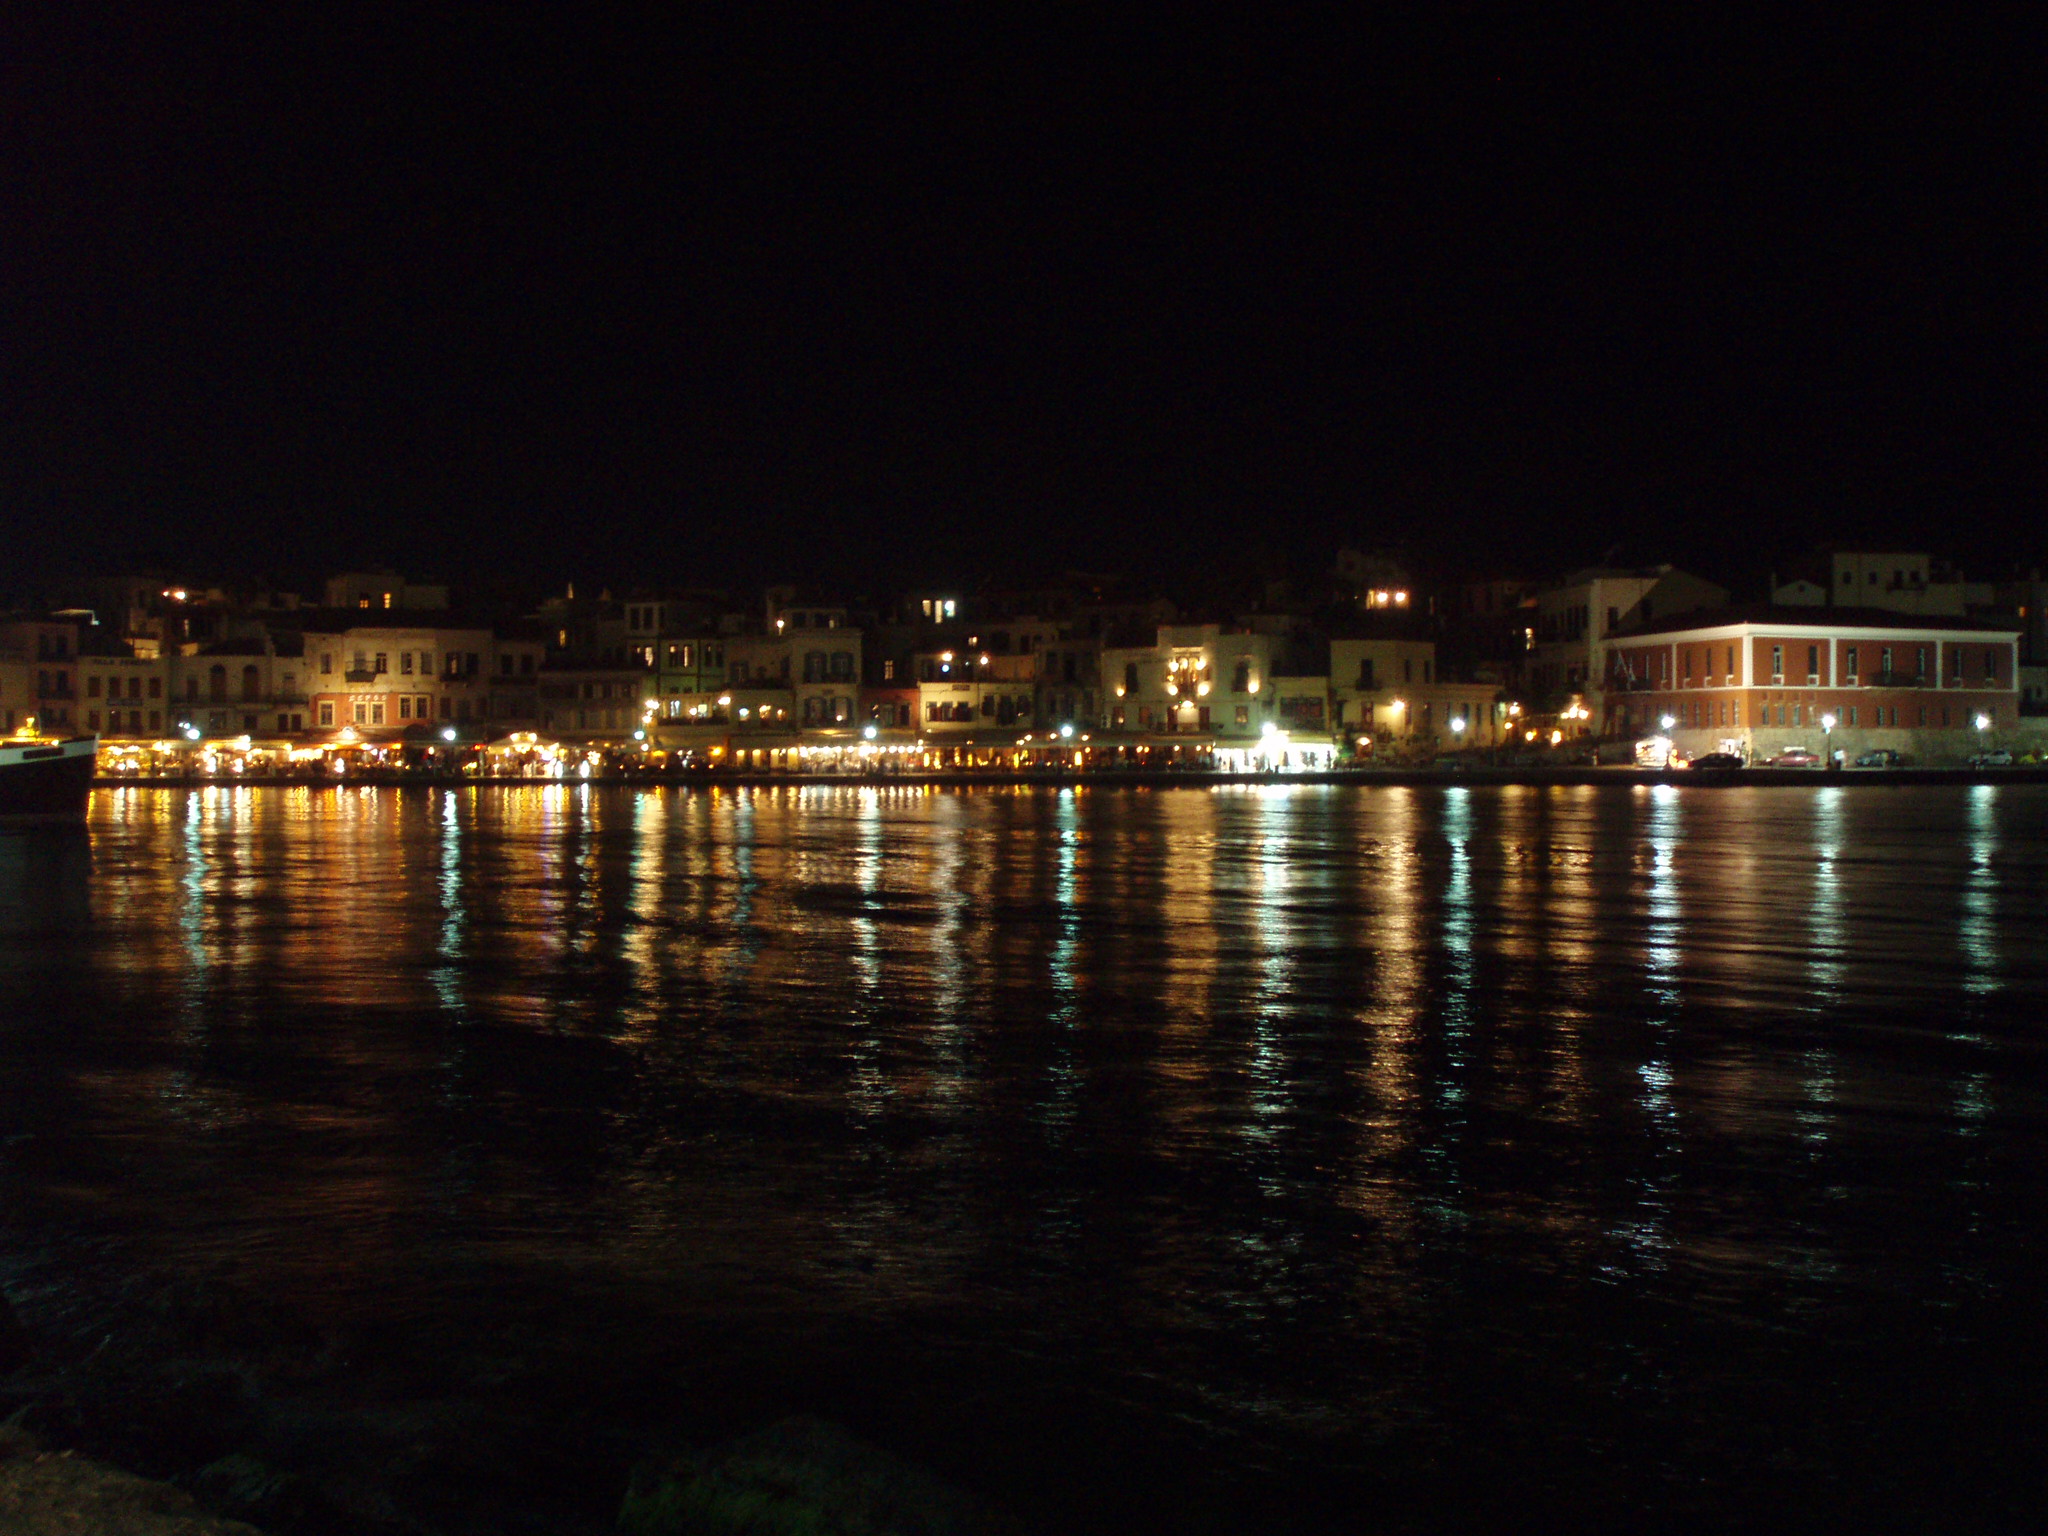 Crete, Greece, Chania Harbour at night